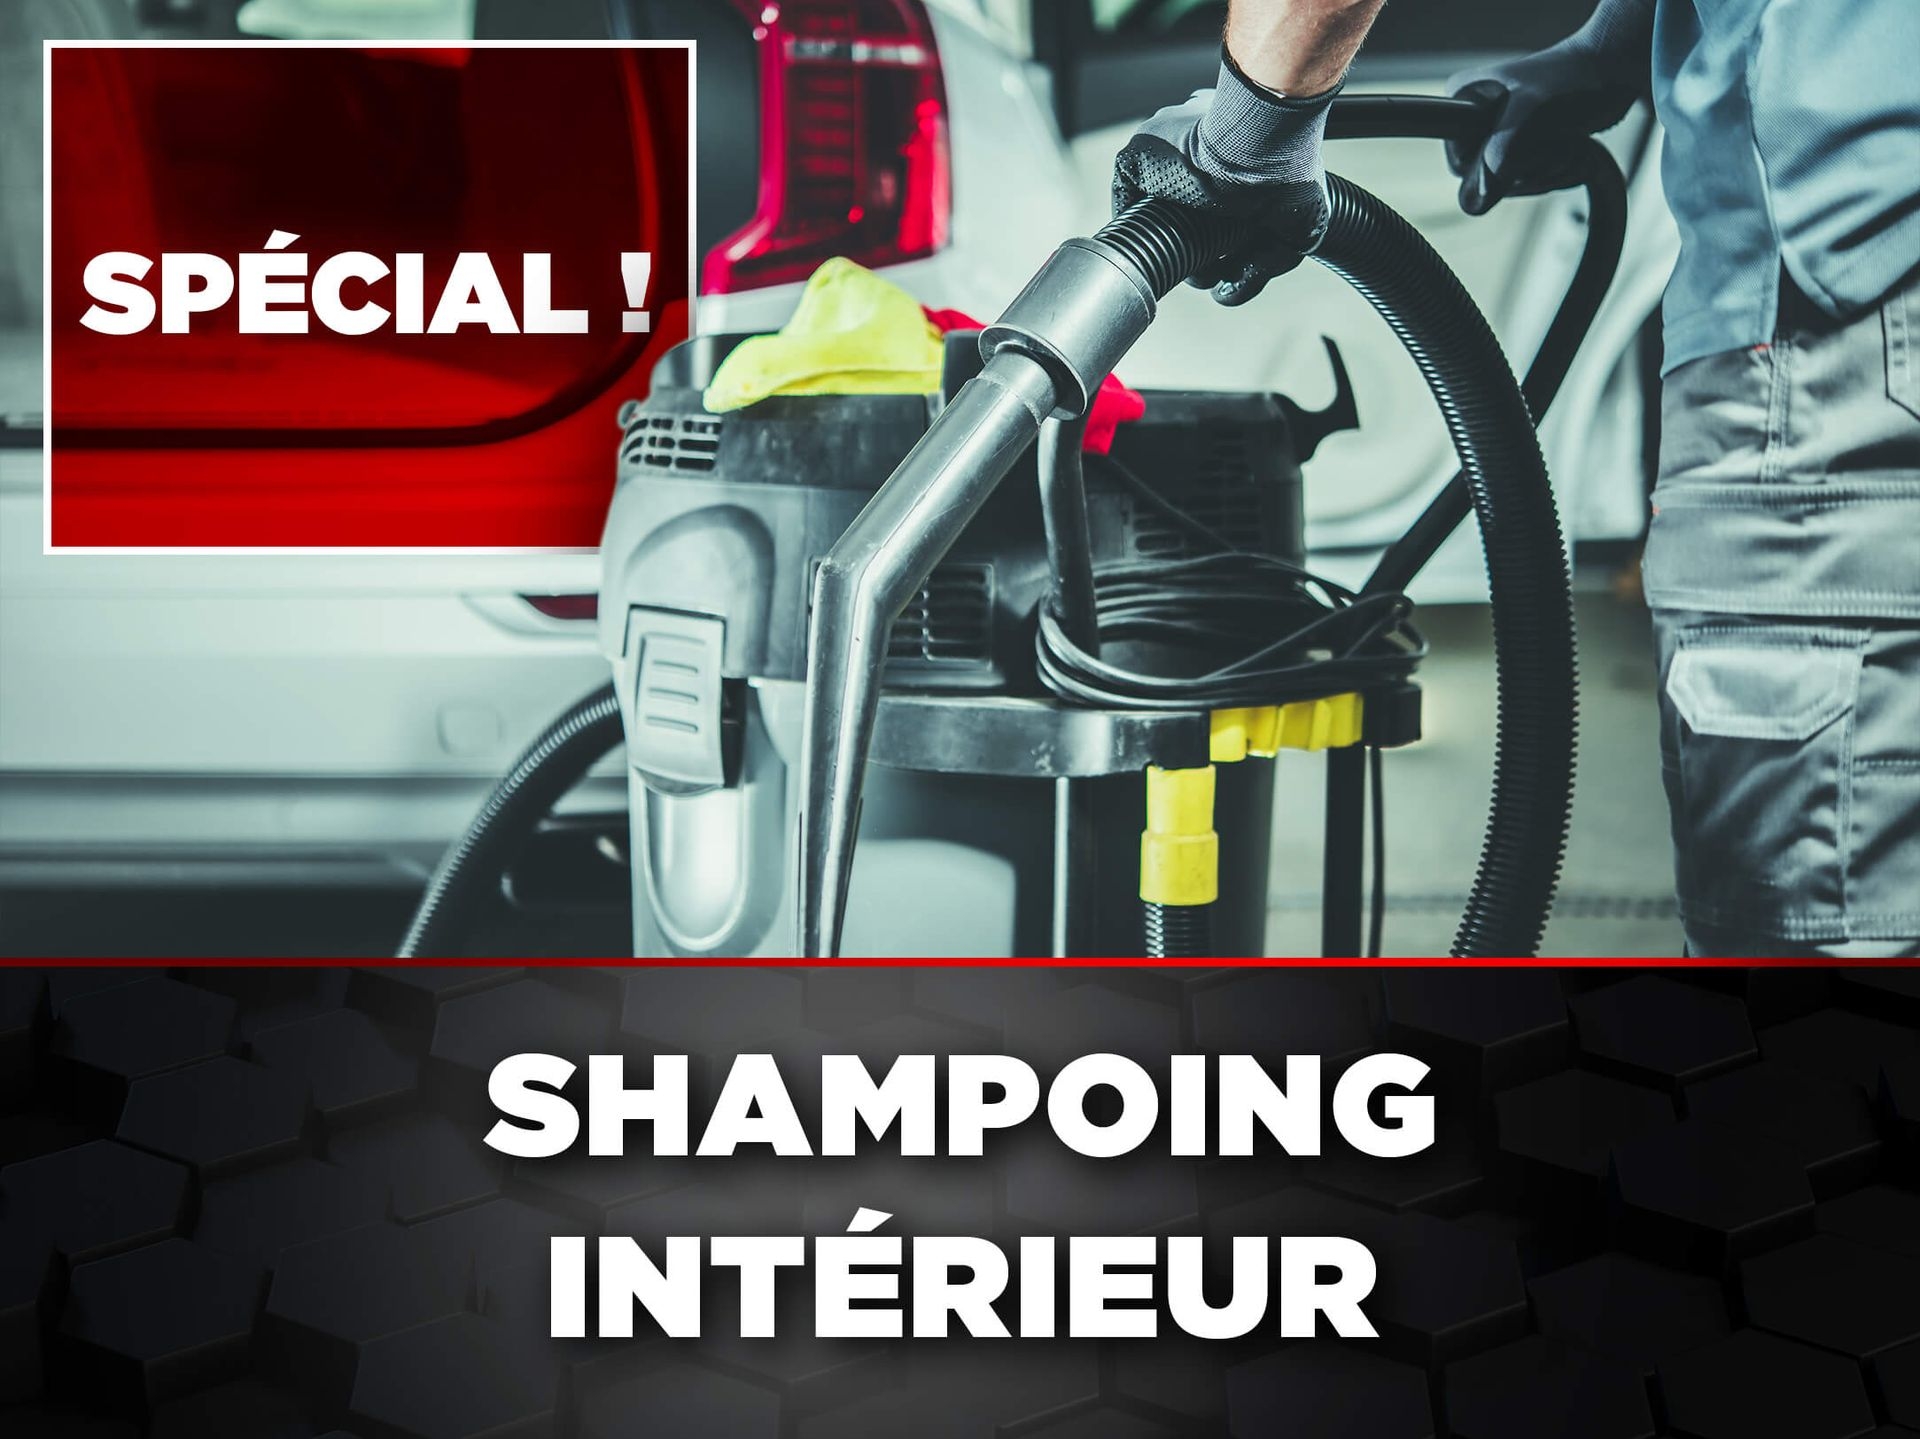 promotion-shampoing-interieur